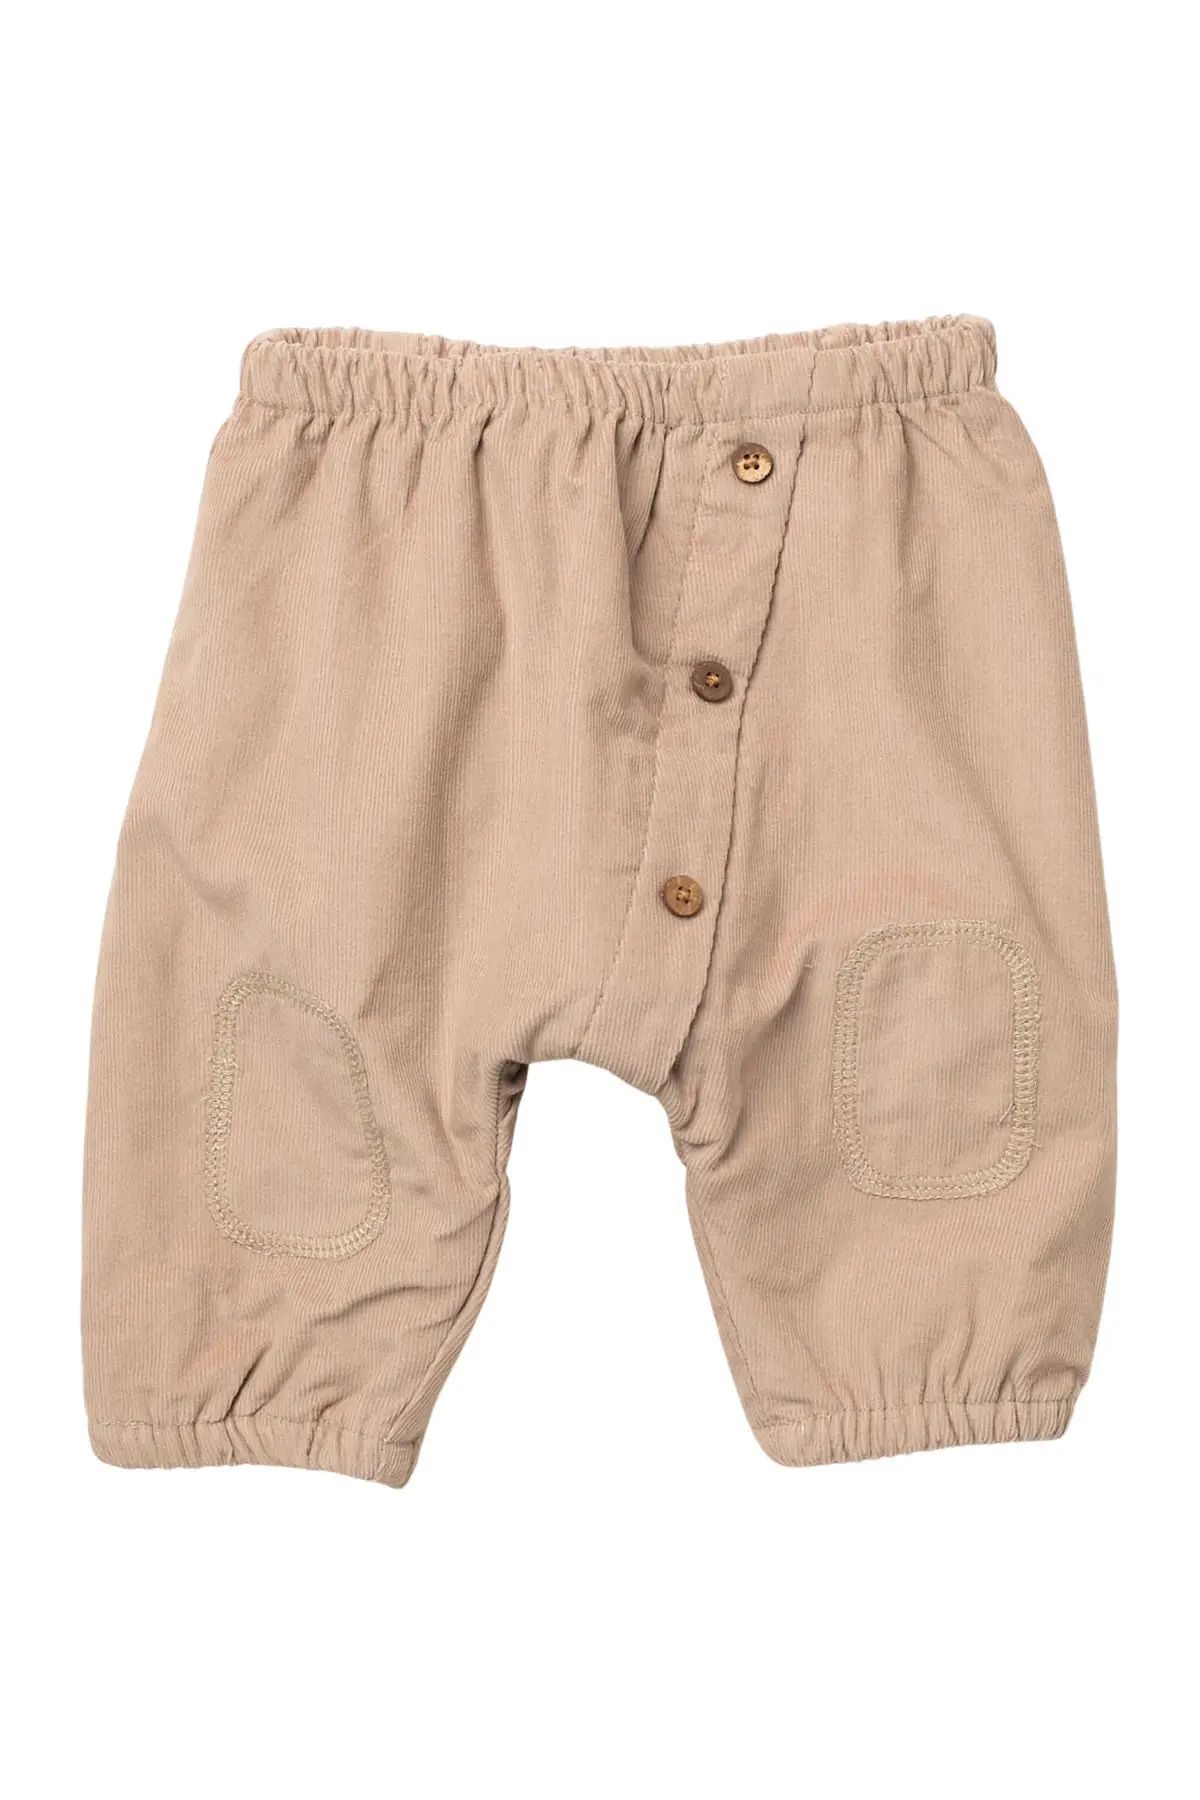 Oliver & Rain Corduroy Pants in Taupe at Nordstrom, Size 3M | Nordstrom